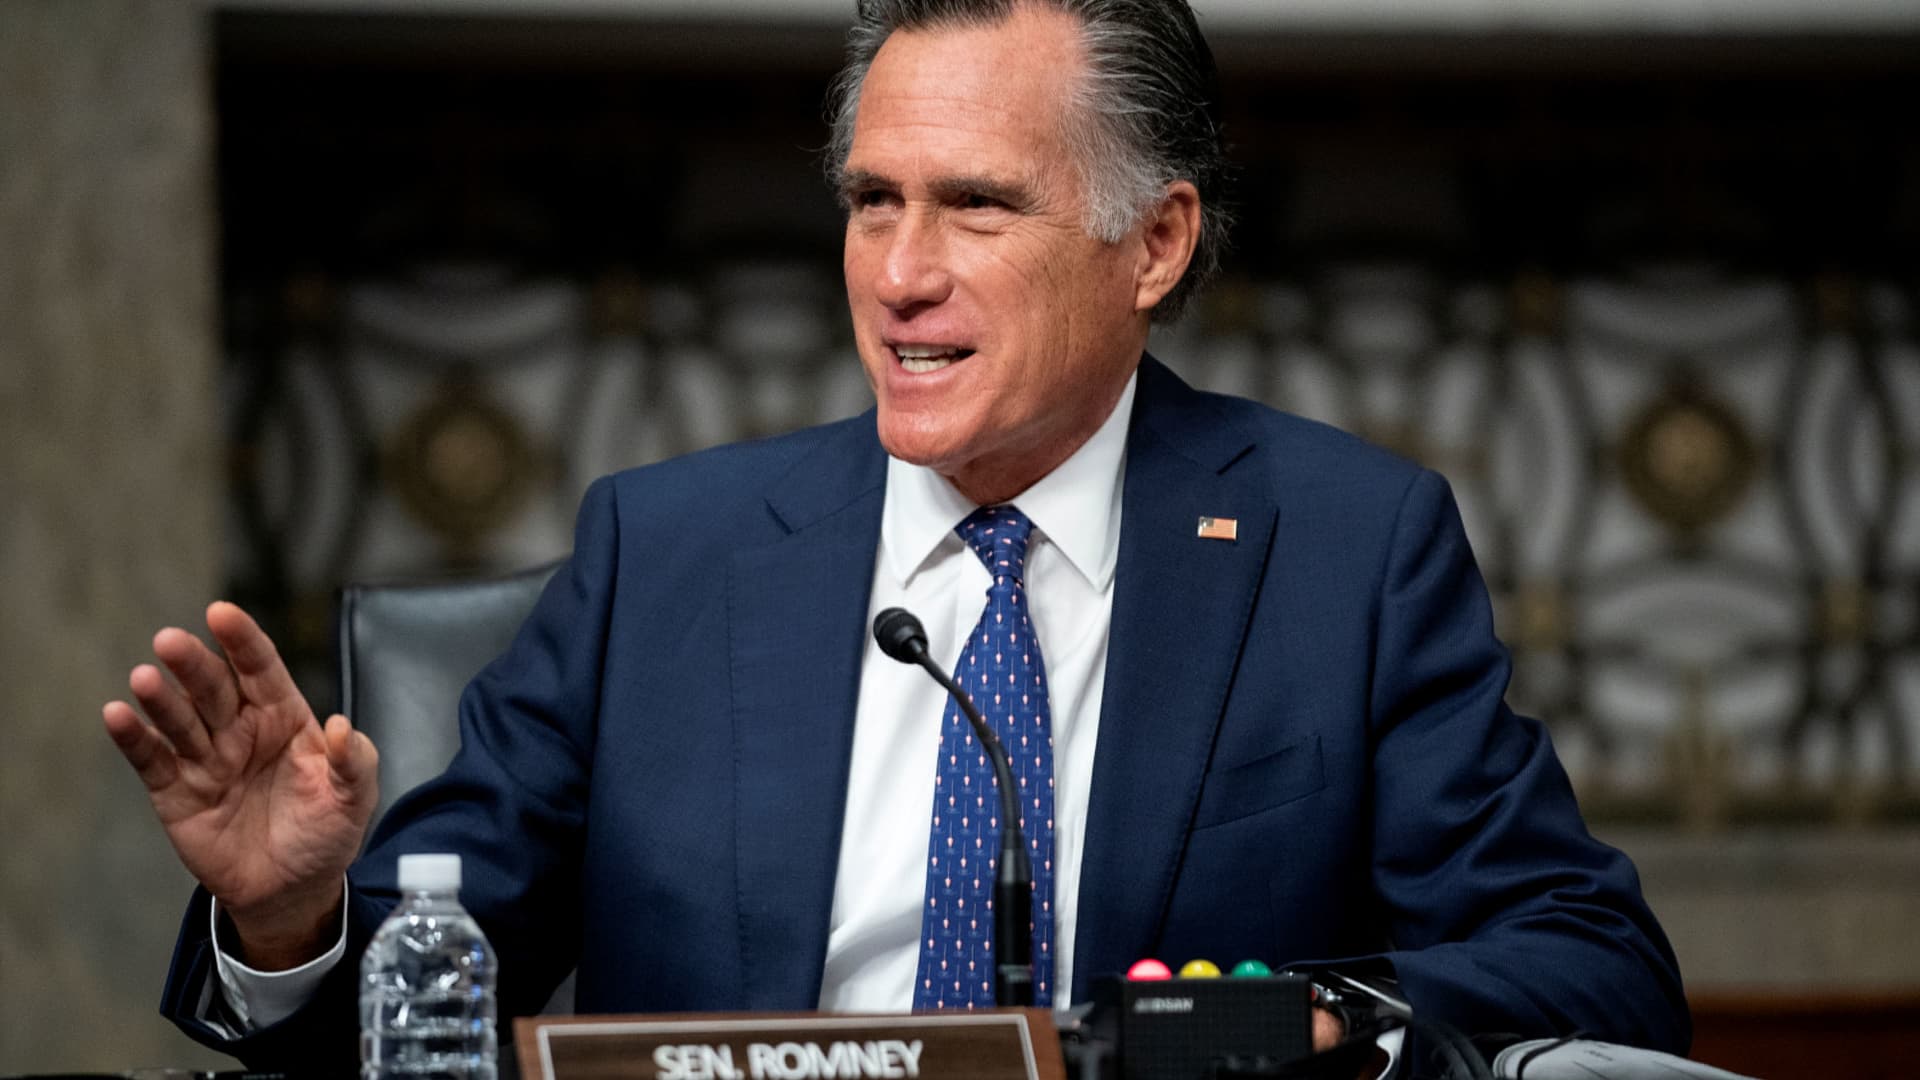 U.S. Senator Mitt Romney (R-UT) speaks during a Senate Health, Education, Labor, and Pensions Committee hearing to examine the federal response to the coronavirus disease (COVID-19) and new emerging variants at Capitol Hill in Washington, D.C., January 11, 2022.